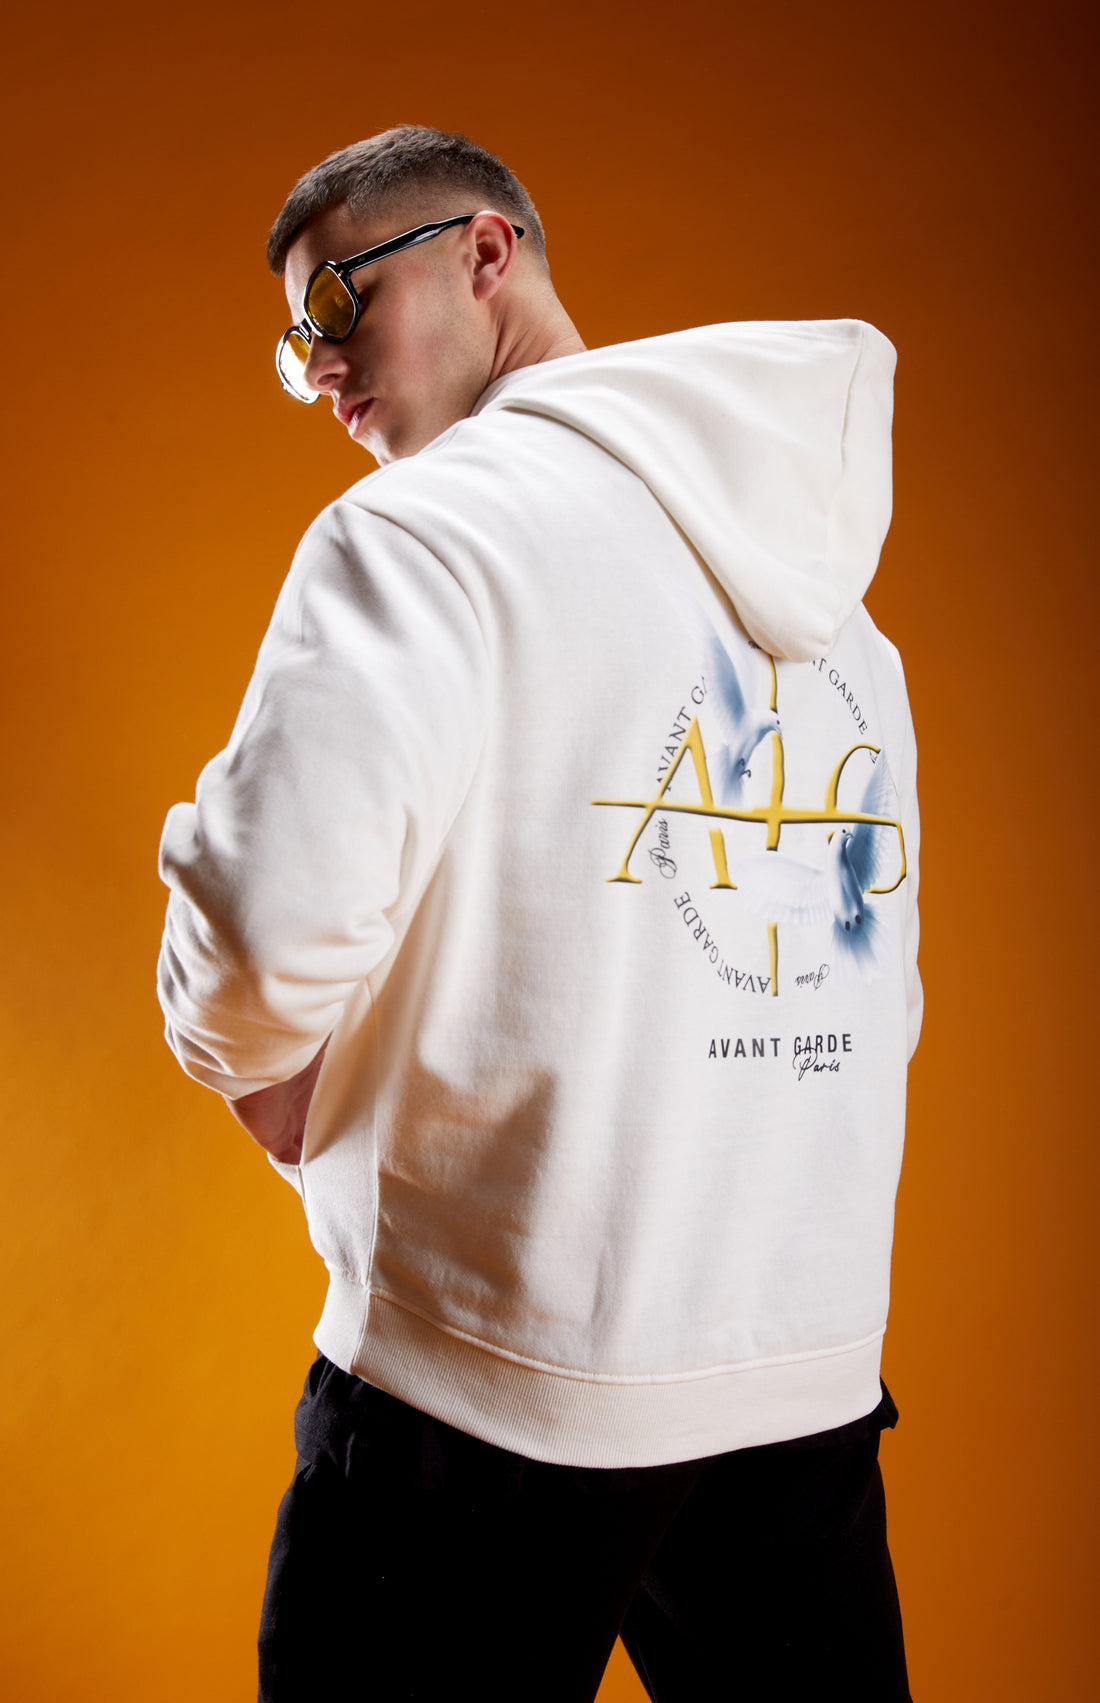 Ailes Hoodie in Off-White